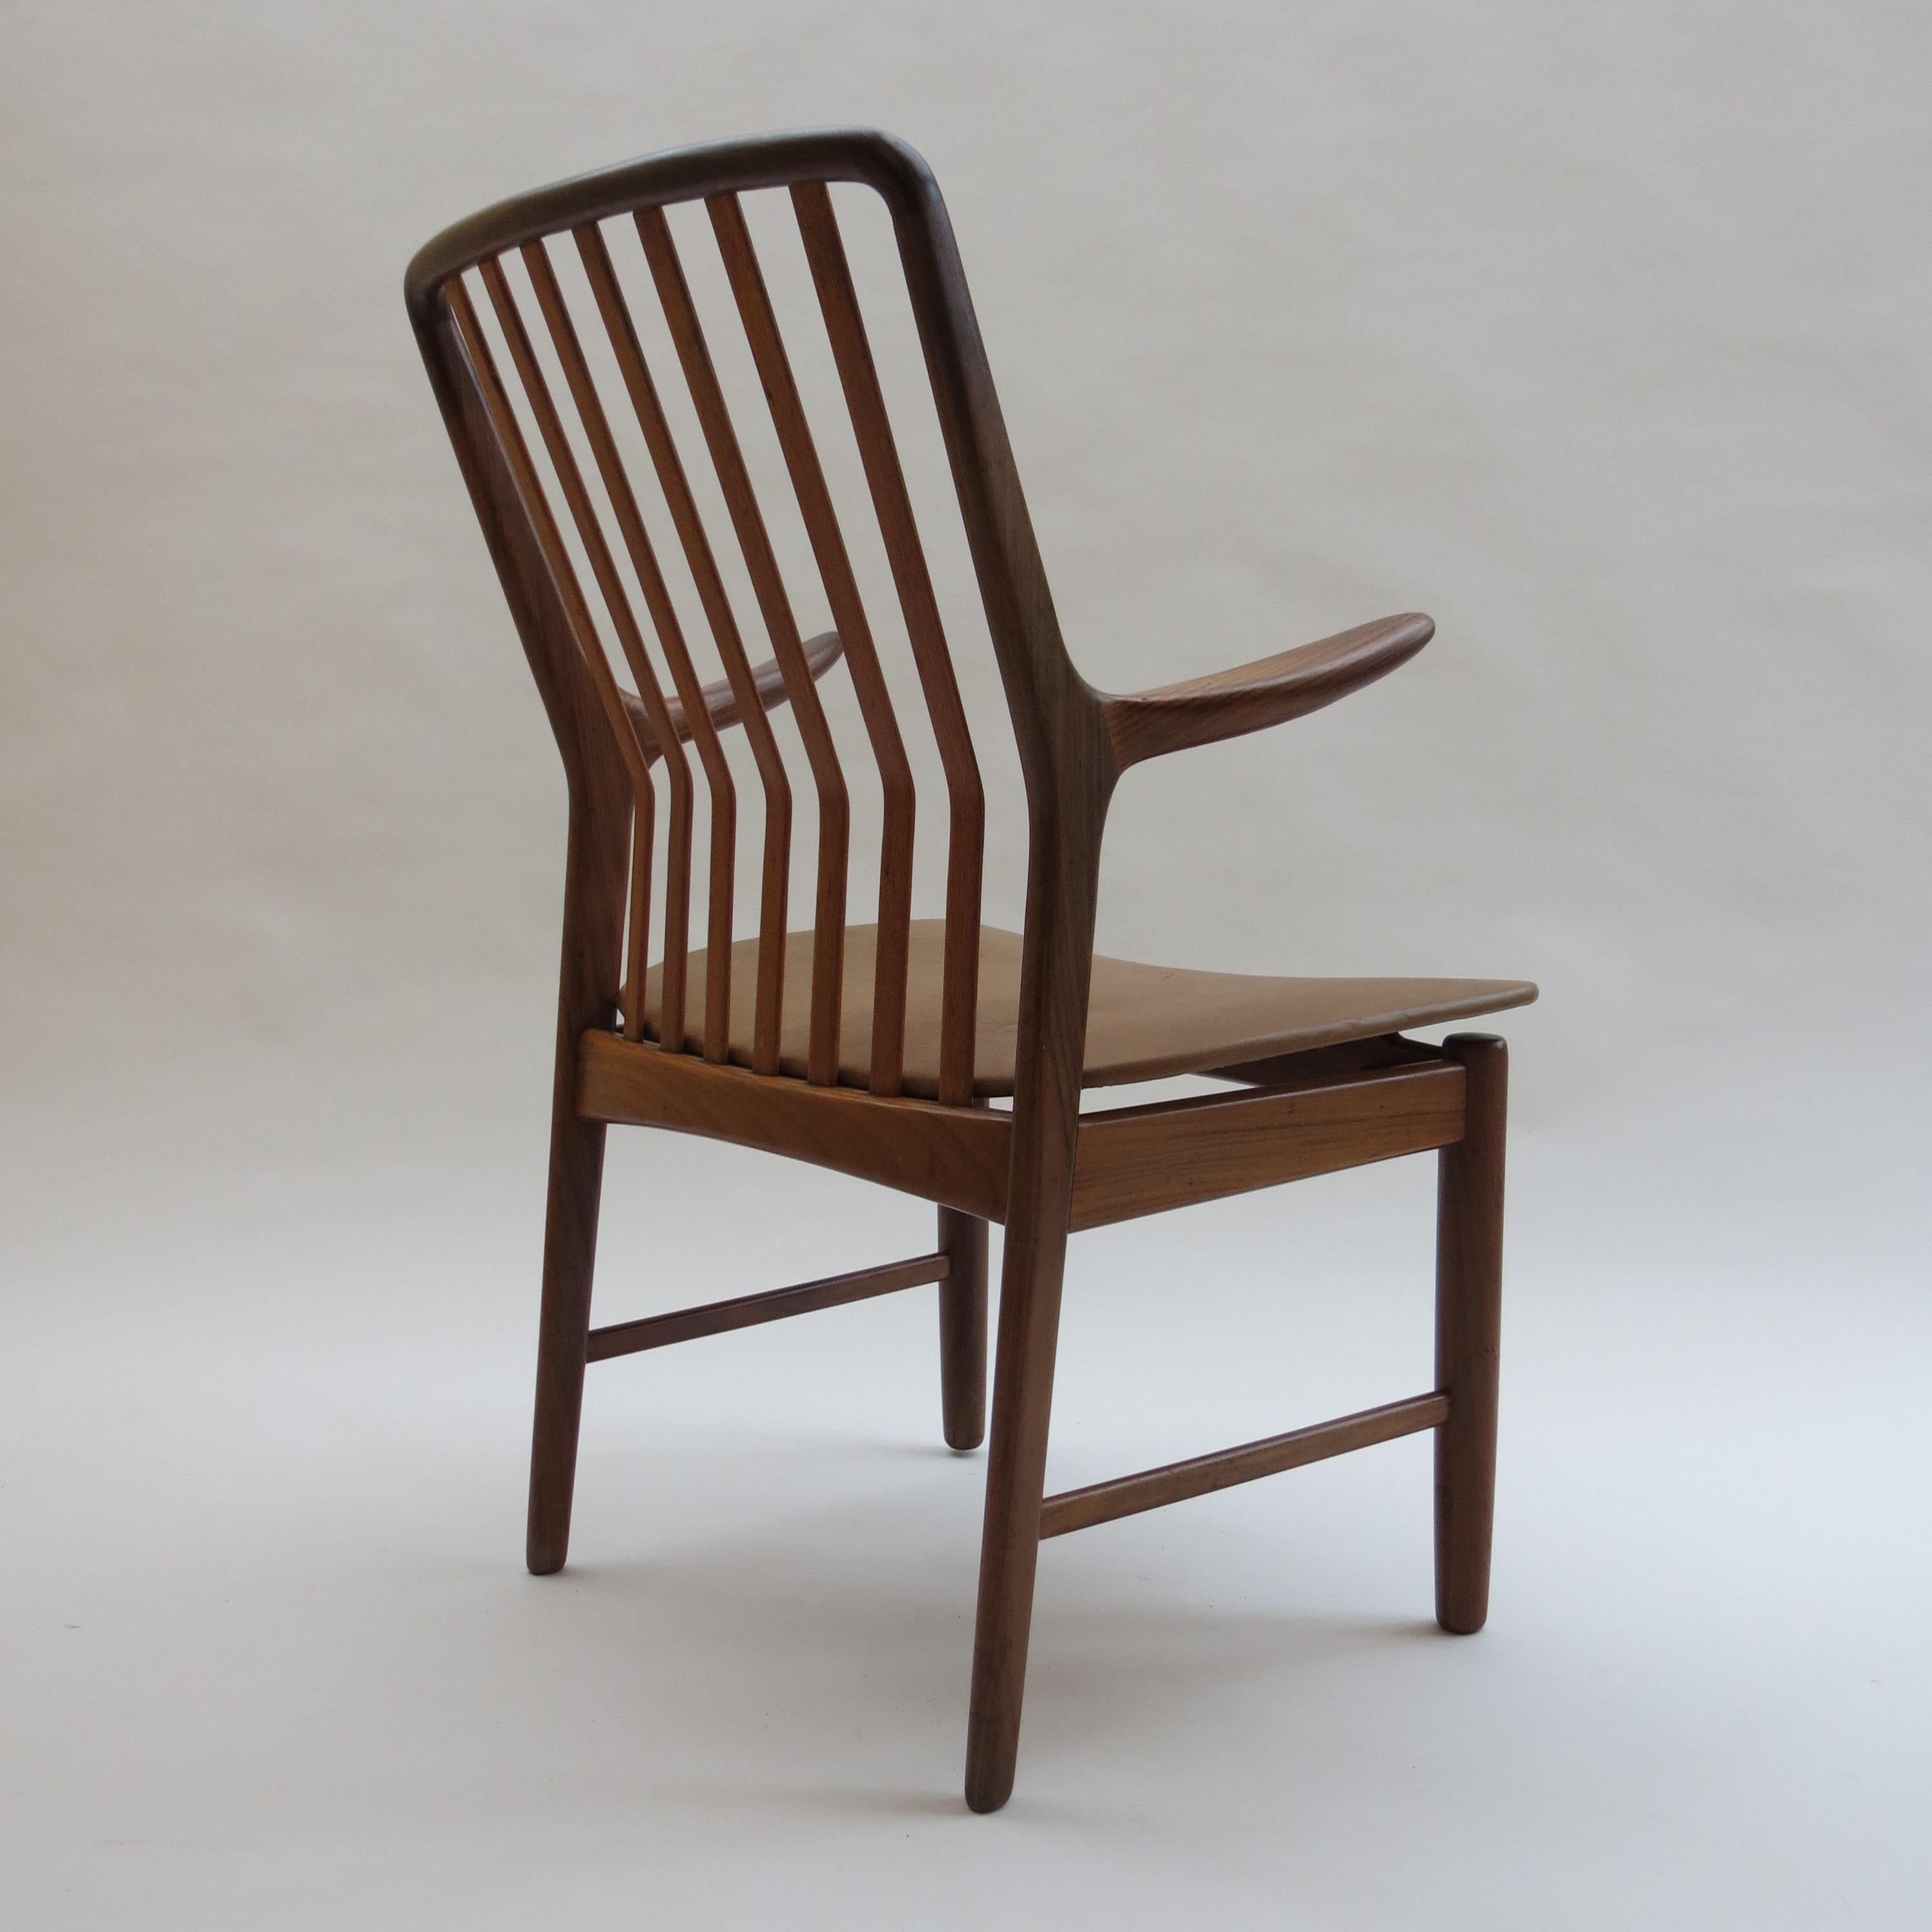 Machine-Made Midcentury Danish Chair by Svend Madsen 1960s Teak with Leather Seat